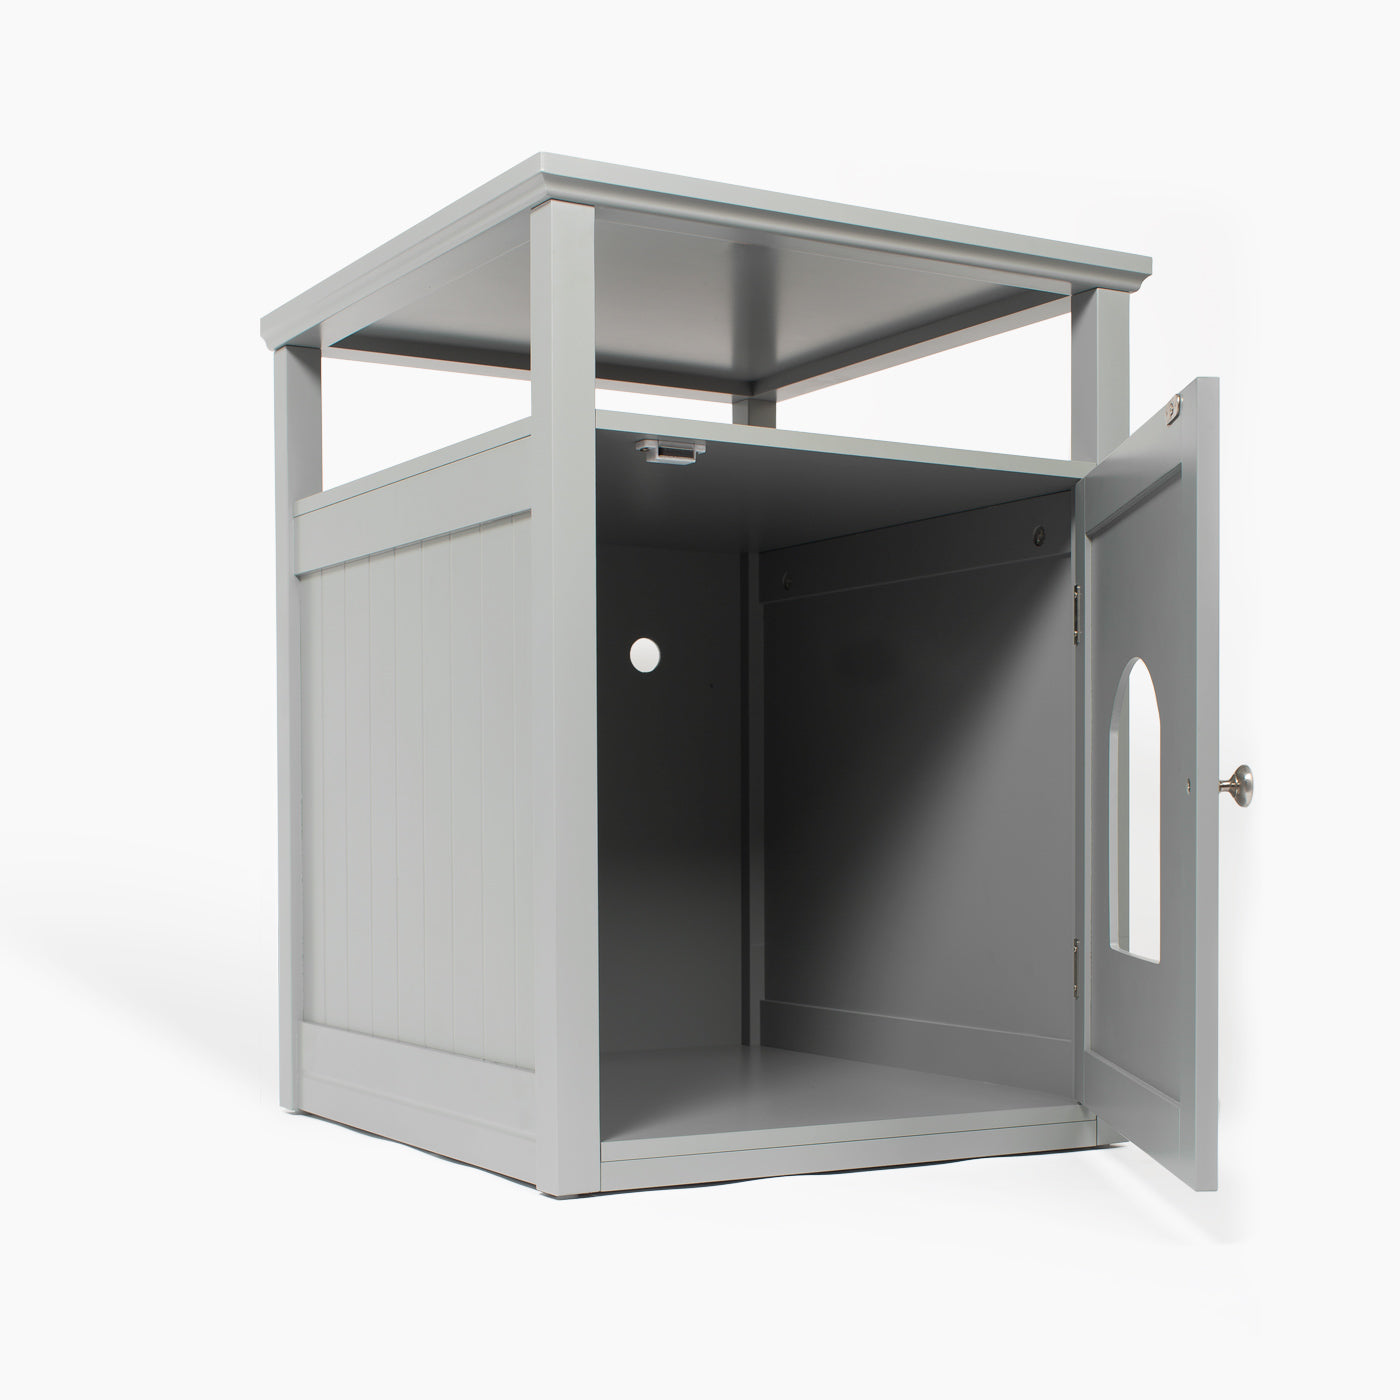 Discover The Perfect Multi-Functional Cat Washroom, Featuring Hinged Door for a Discreet Cat Loo. Suitable for All Cat Breeds! Made From Durable Wood to Ensure a Stylish Finish That Suits Any Home Decor! Includes a Complimentary Litter Tray. Available In Grey & White Now at Lords & Labradors US